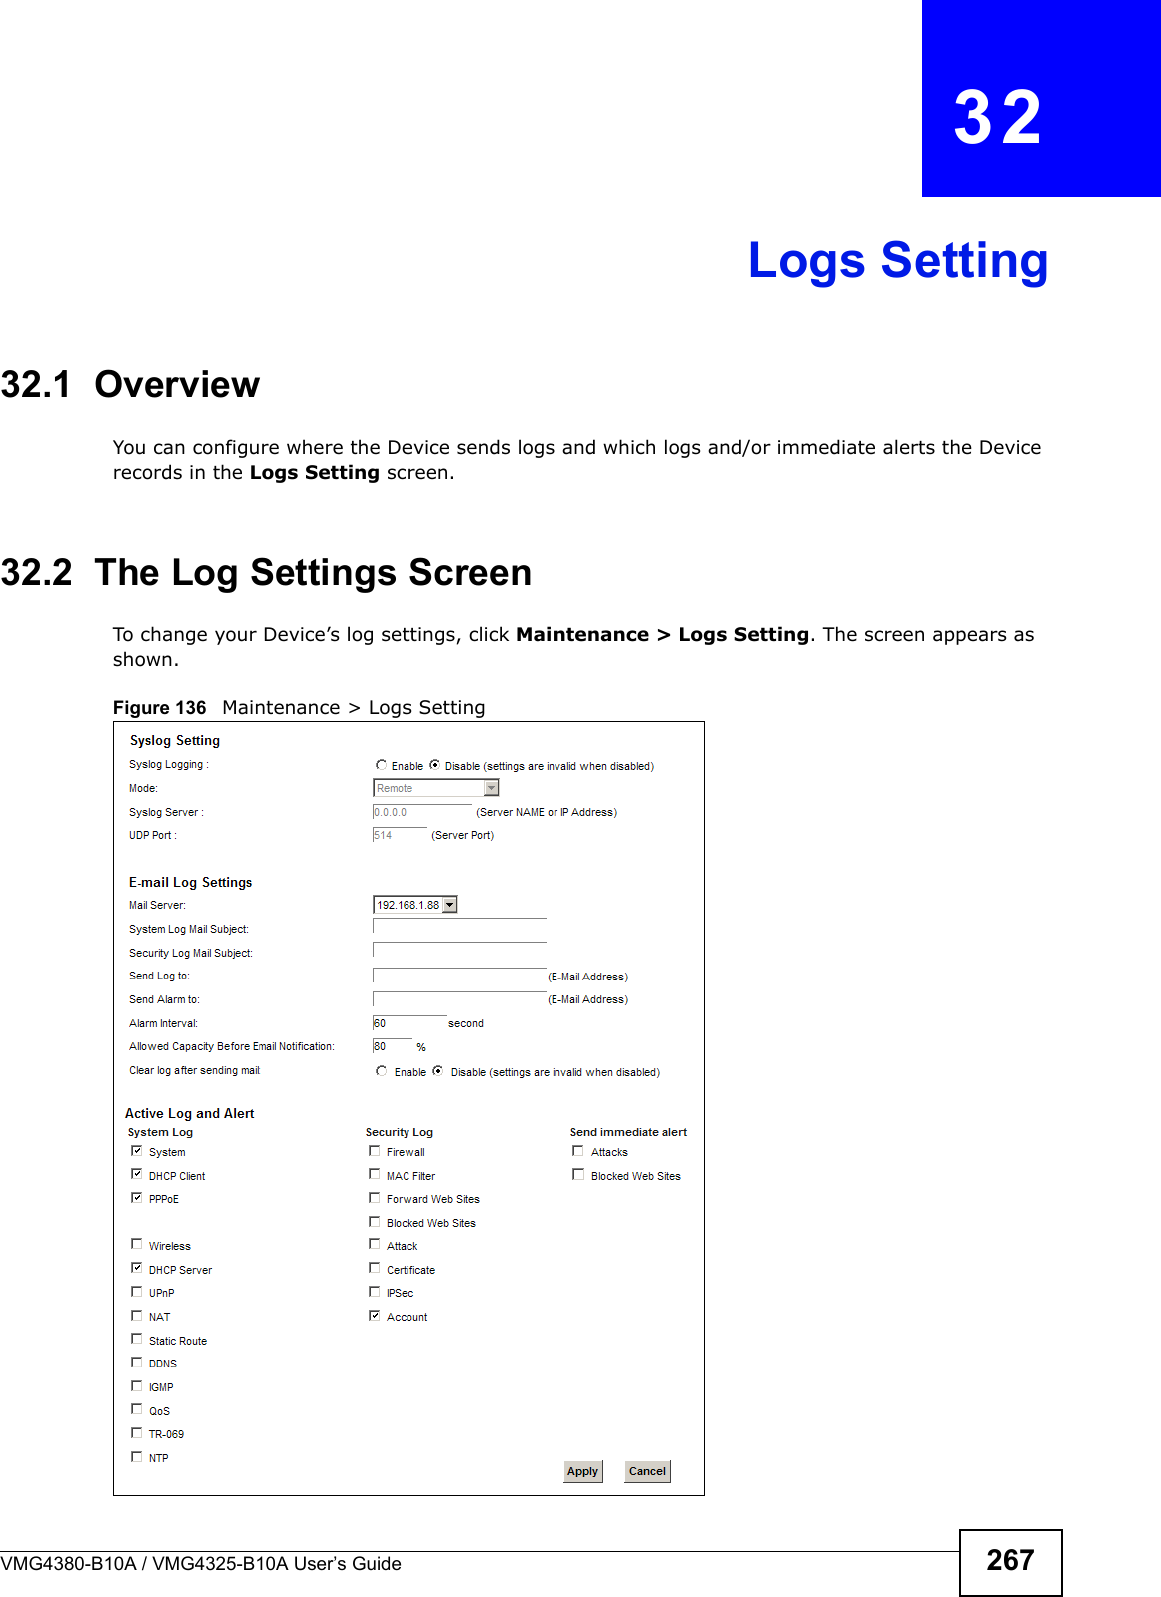 VMG4380-B10A / VMG4325-B10A User’s Guide 267CHAPTER  32Logs Setting32.1  Overview You can configure where the Device sends logs and which logs and/or immediate alerts the Device records in the Logs Setting screen.32.2  The Log Settings ScreenTo change your Device’s log settings, click Maintenance &gt; Logs Setting. The screen appears as shown.Figure 136   Maintenance &gt; Logs Setting